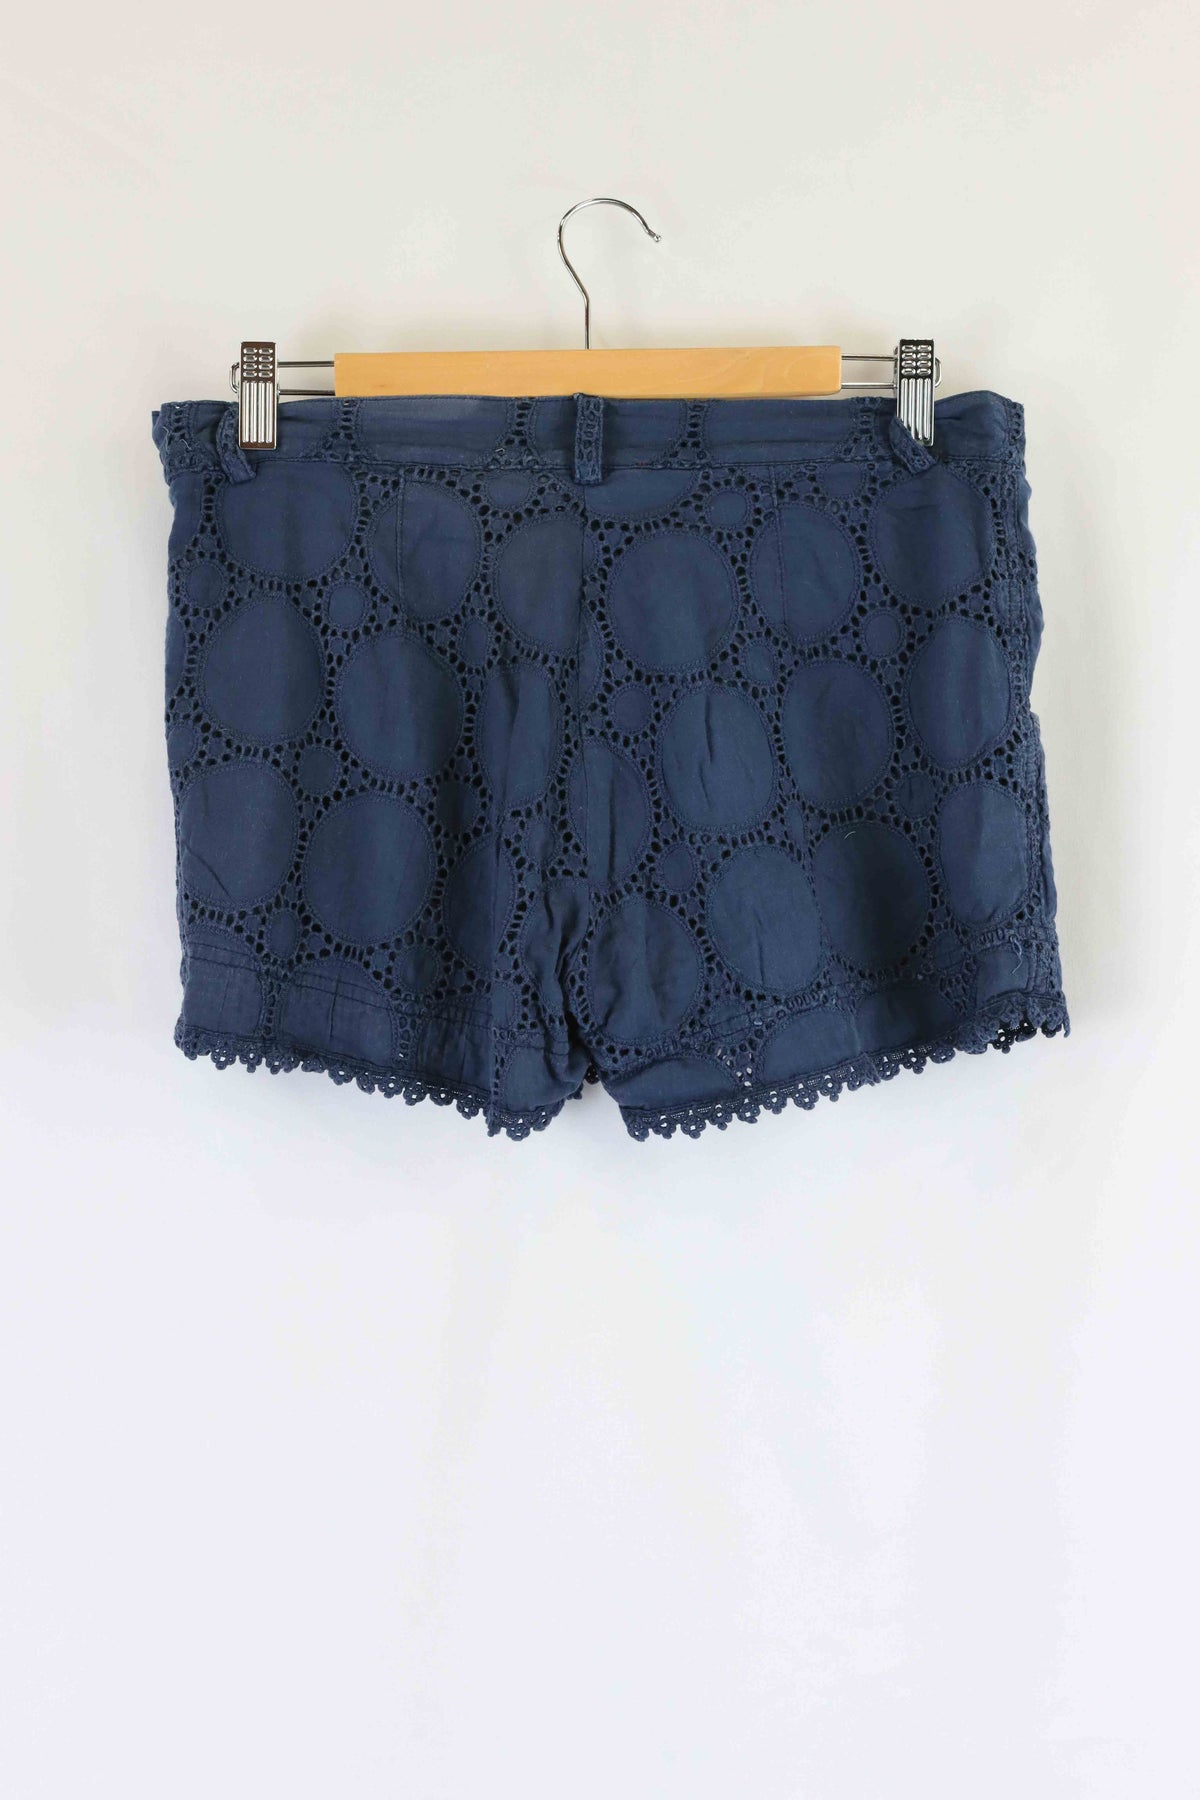 Tilly by Lee Mathews Blue Lace Shorts 8